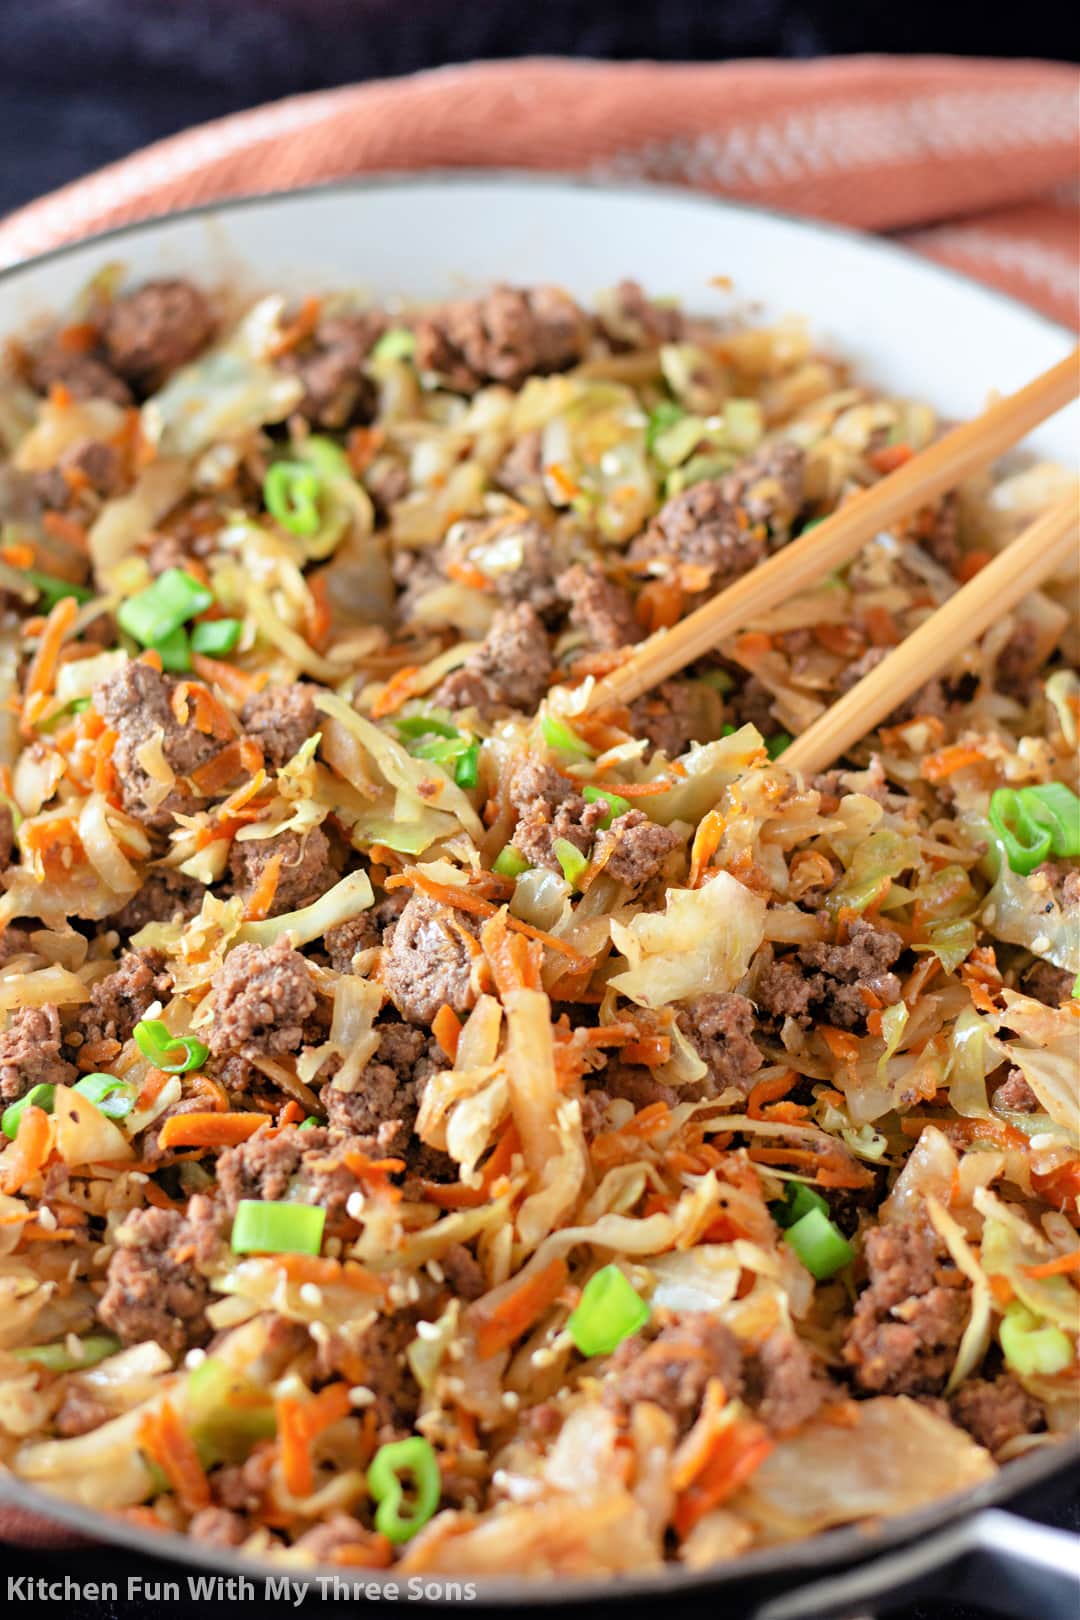 Ground beef and coleslaw in a large bowl with a pair of chopsticks